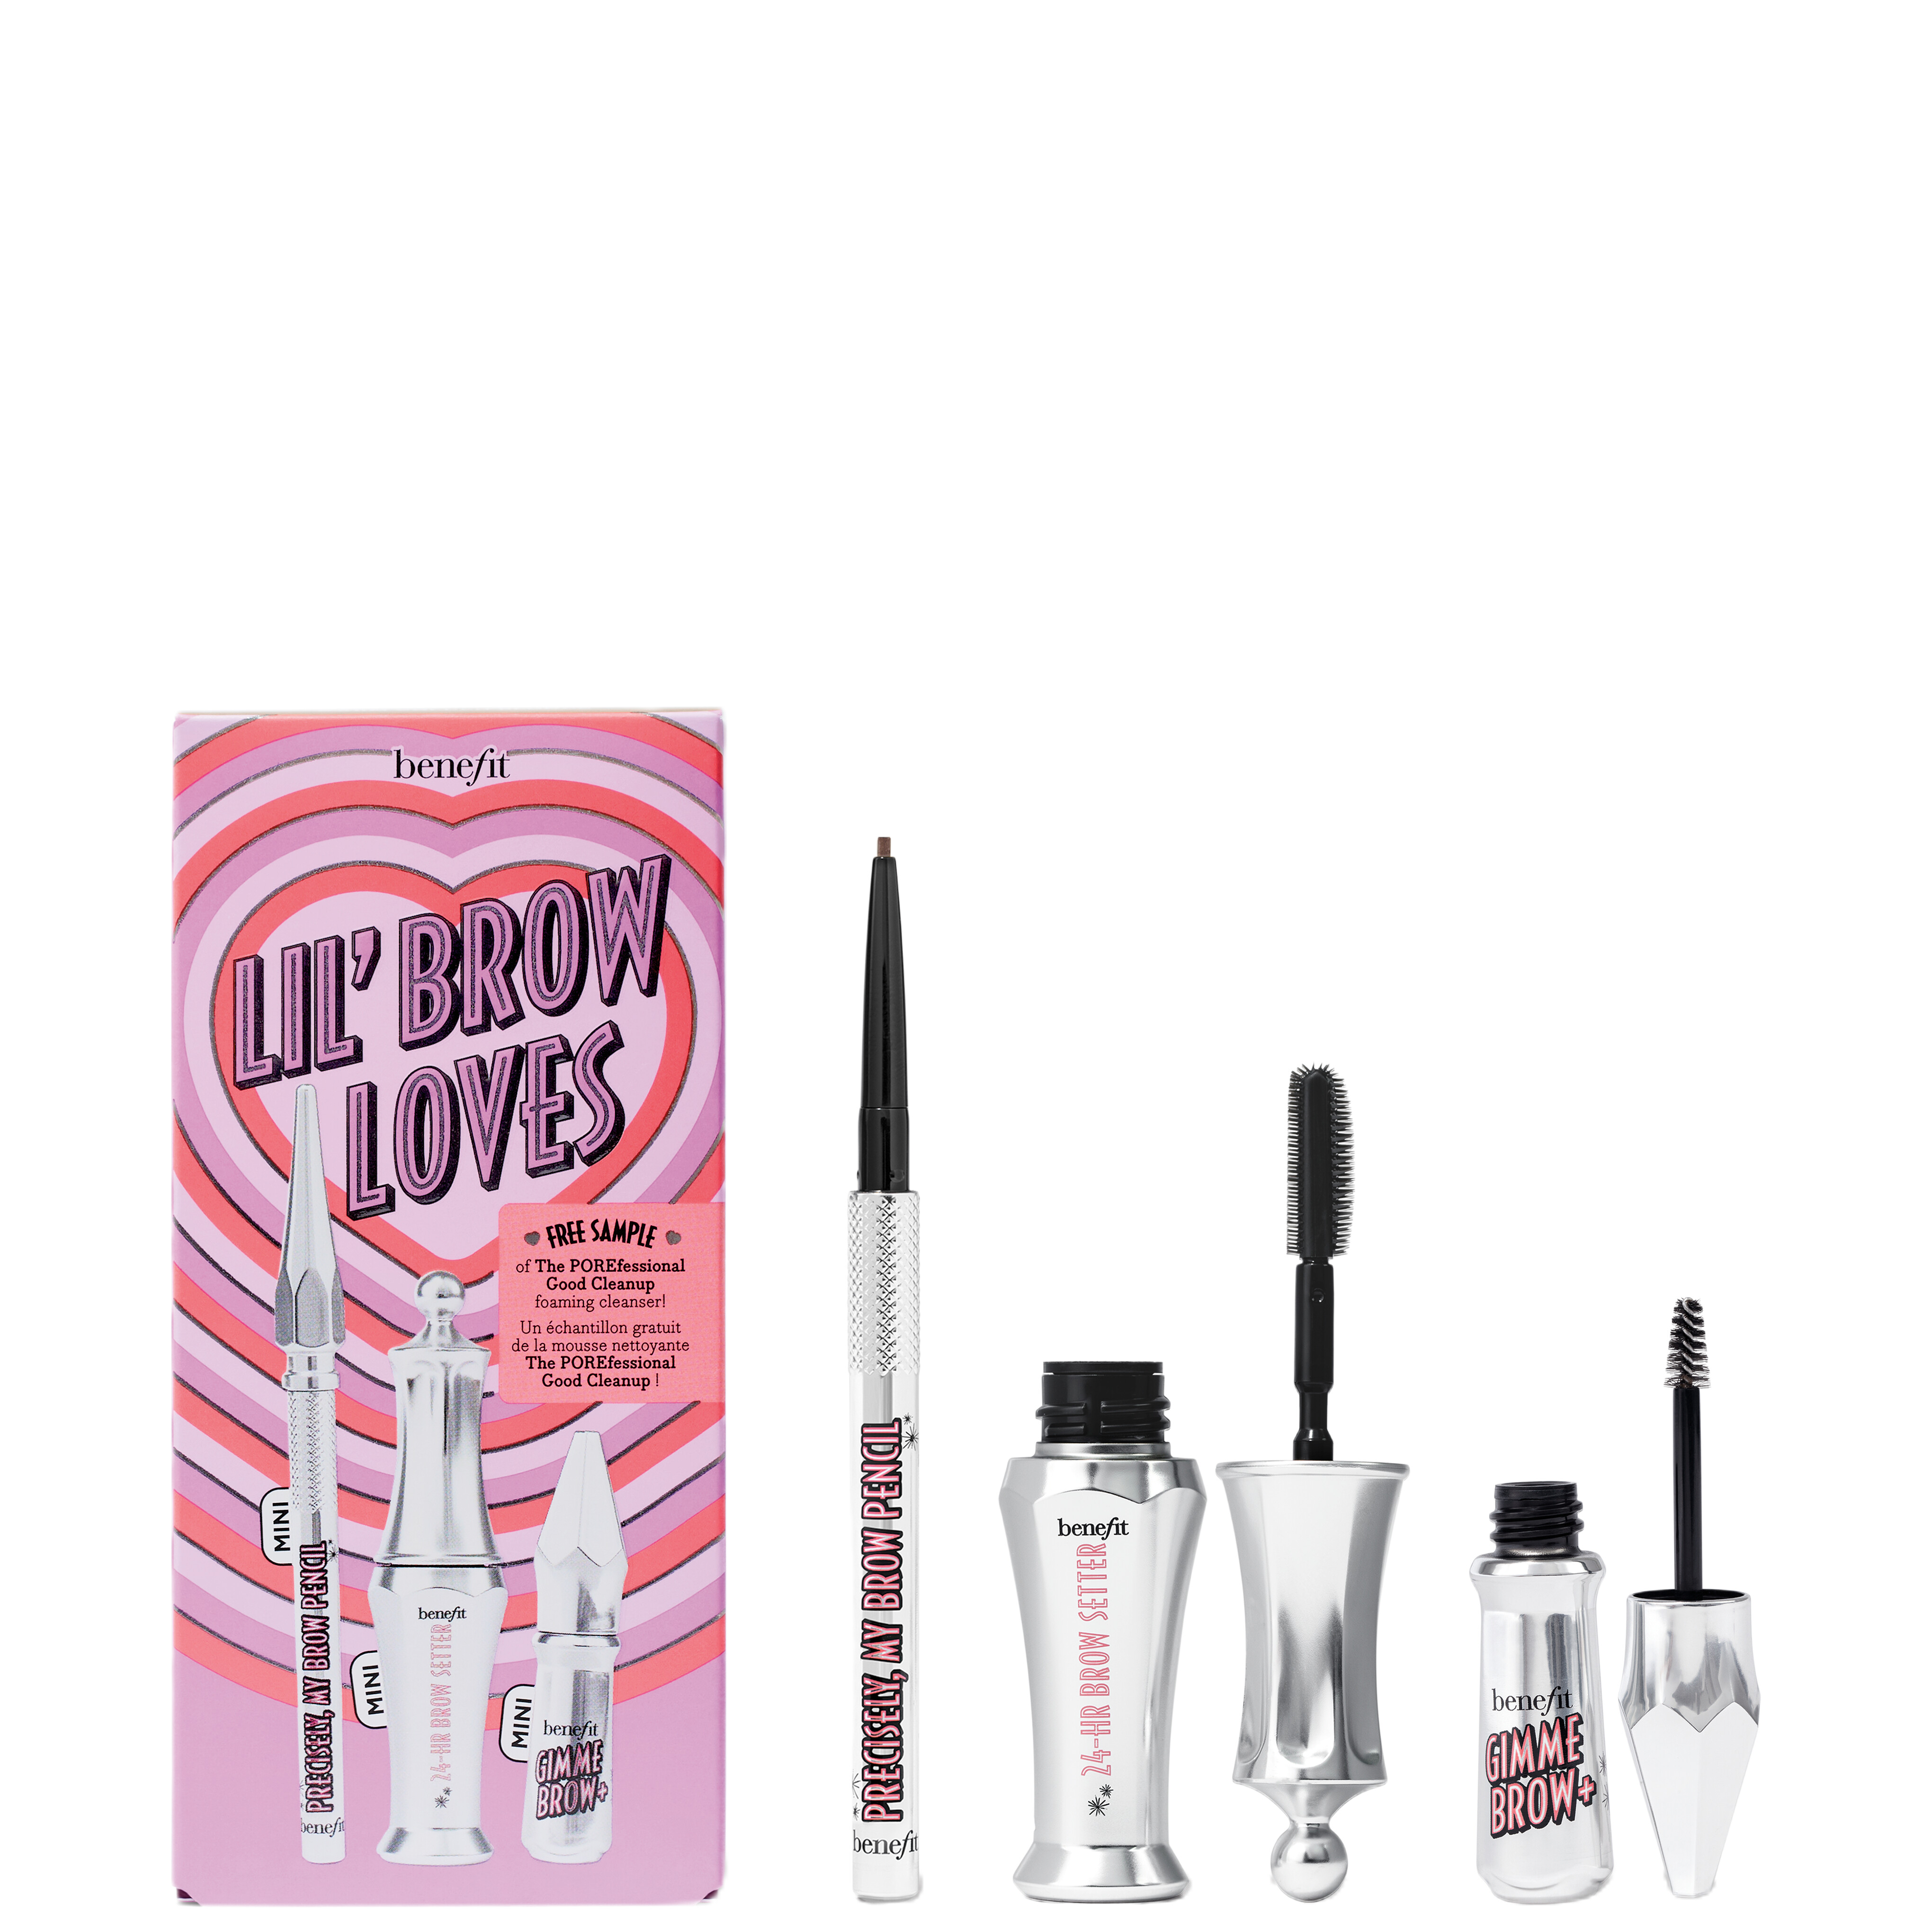 Benefit Lil' Brow Loves Mini Brow Gift Set 4.5 - Neutral Deep Brown